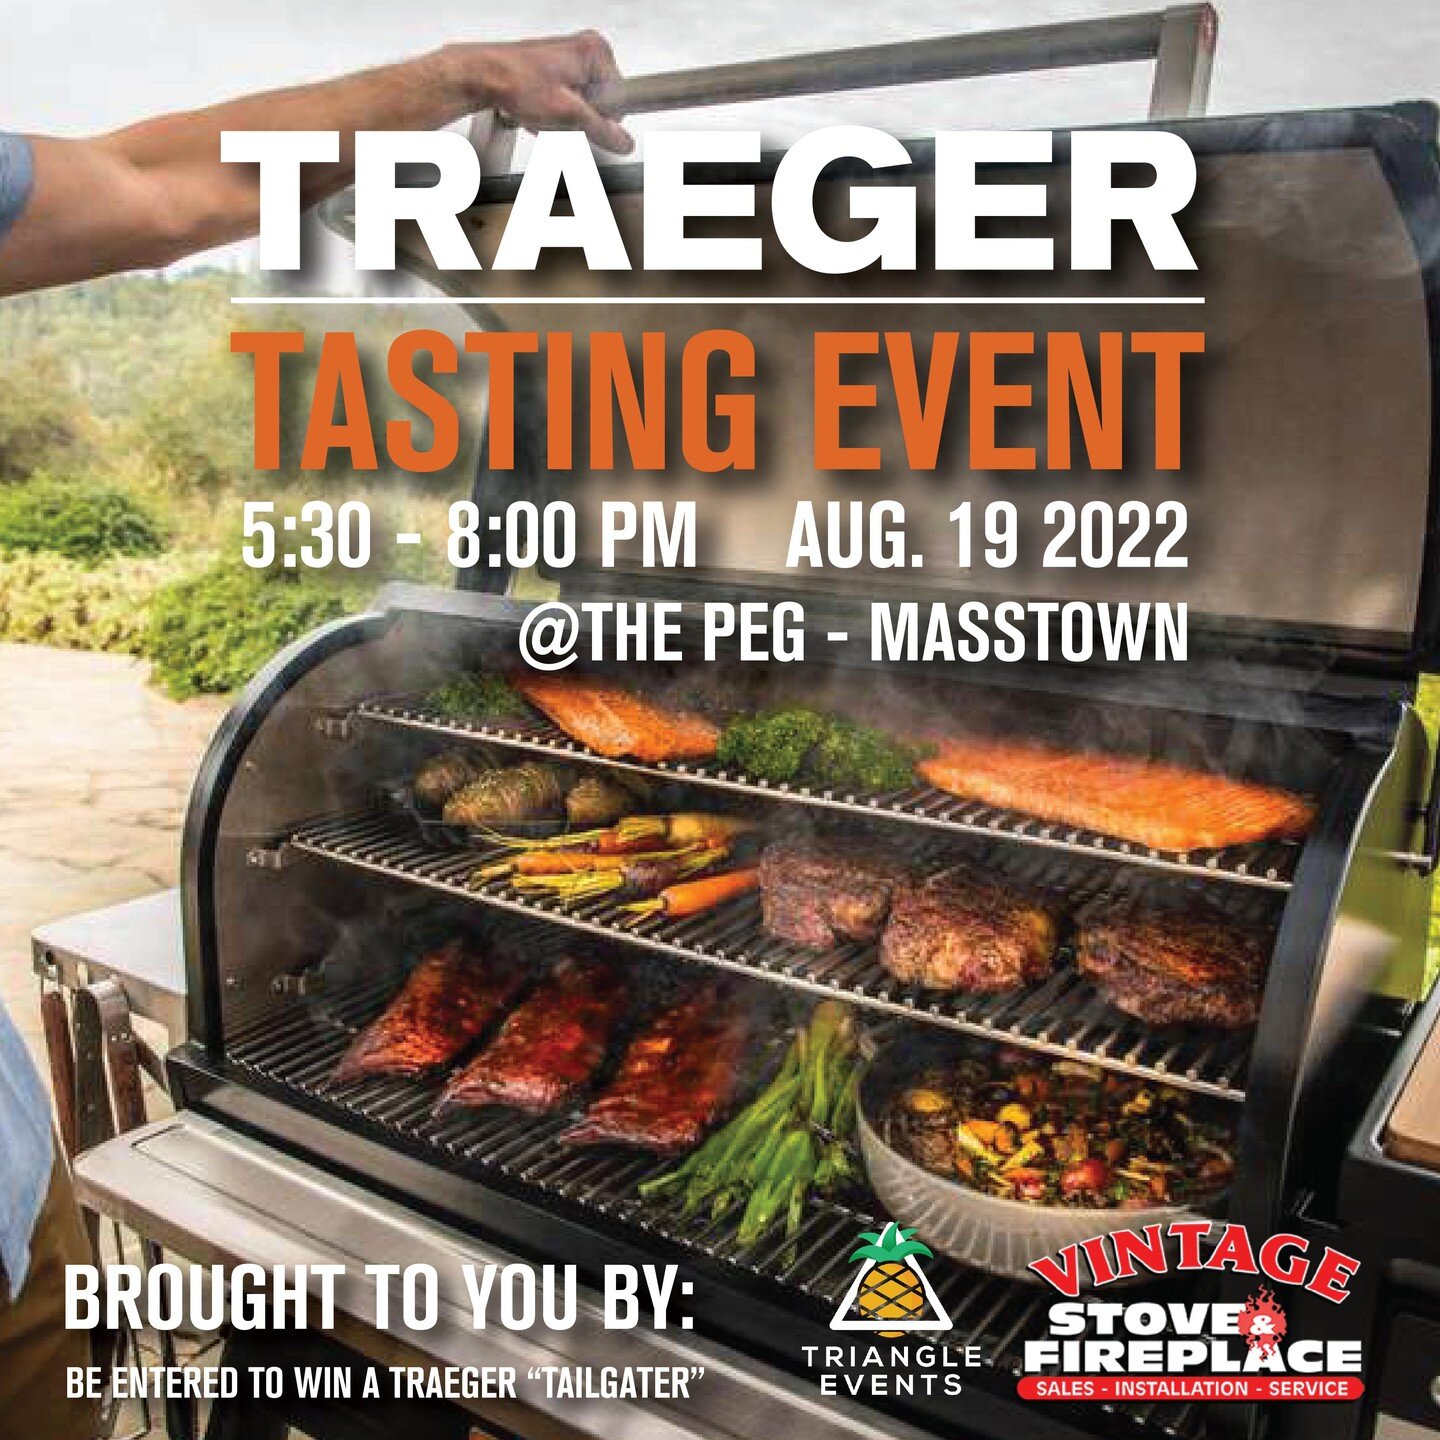 TICKETS ON SALE NOW! VISIT OUR WEBSITE FOR MORE INFORMATION! (Link in Bio)
.
On the fence about buying a Traeger? Already own one and know how great they are? Either way, you'll want to check out this tasting event!
.
We will be teaming up with @vint